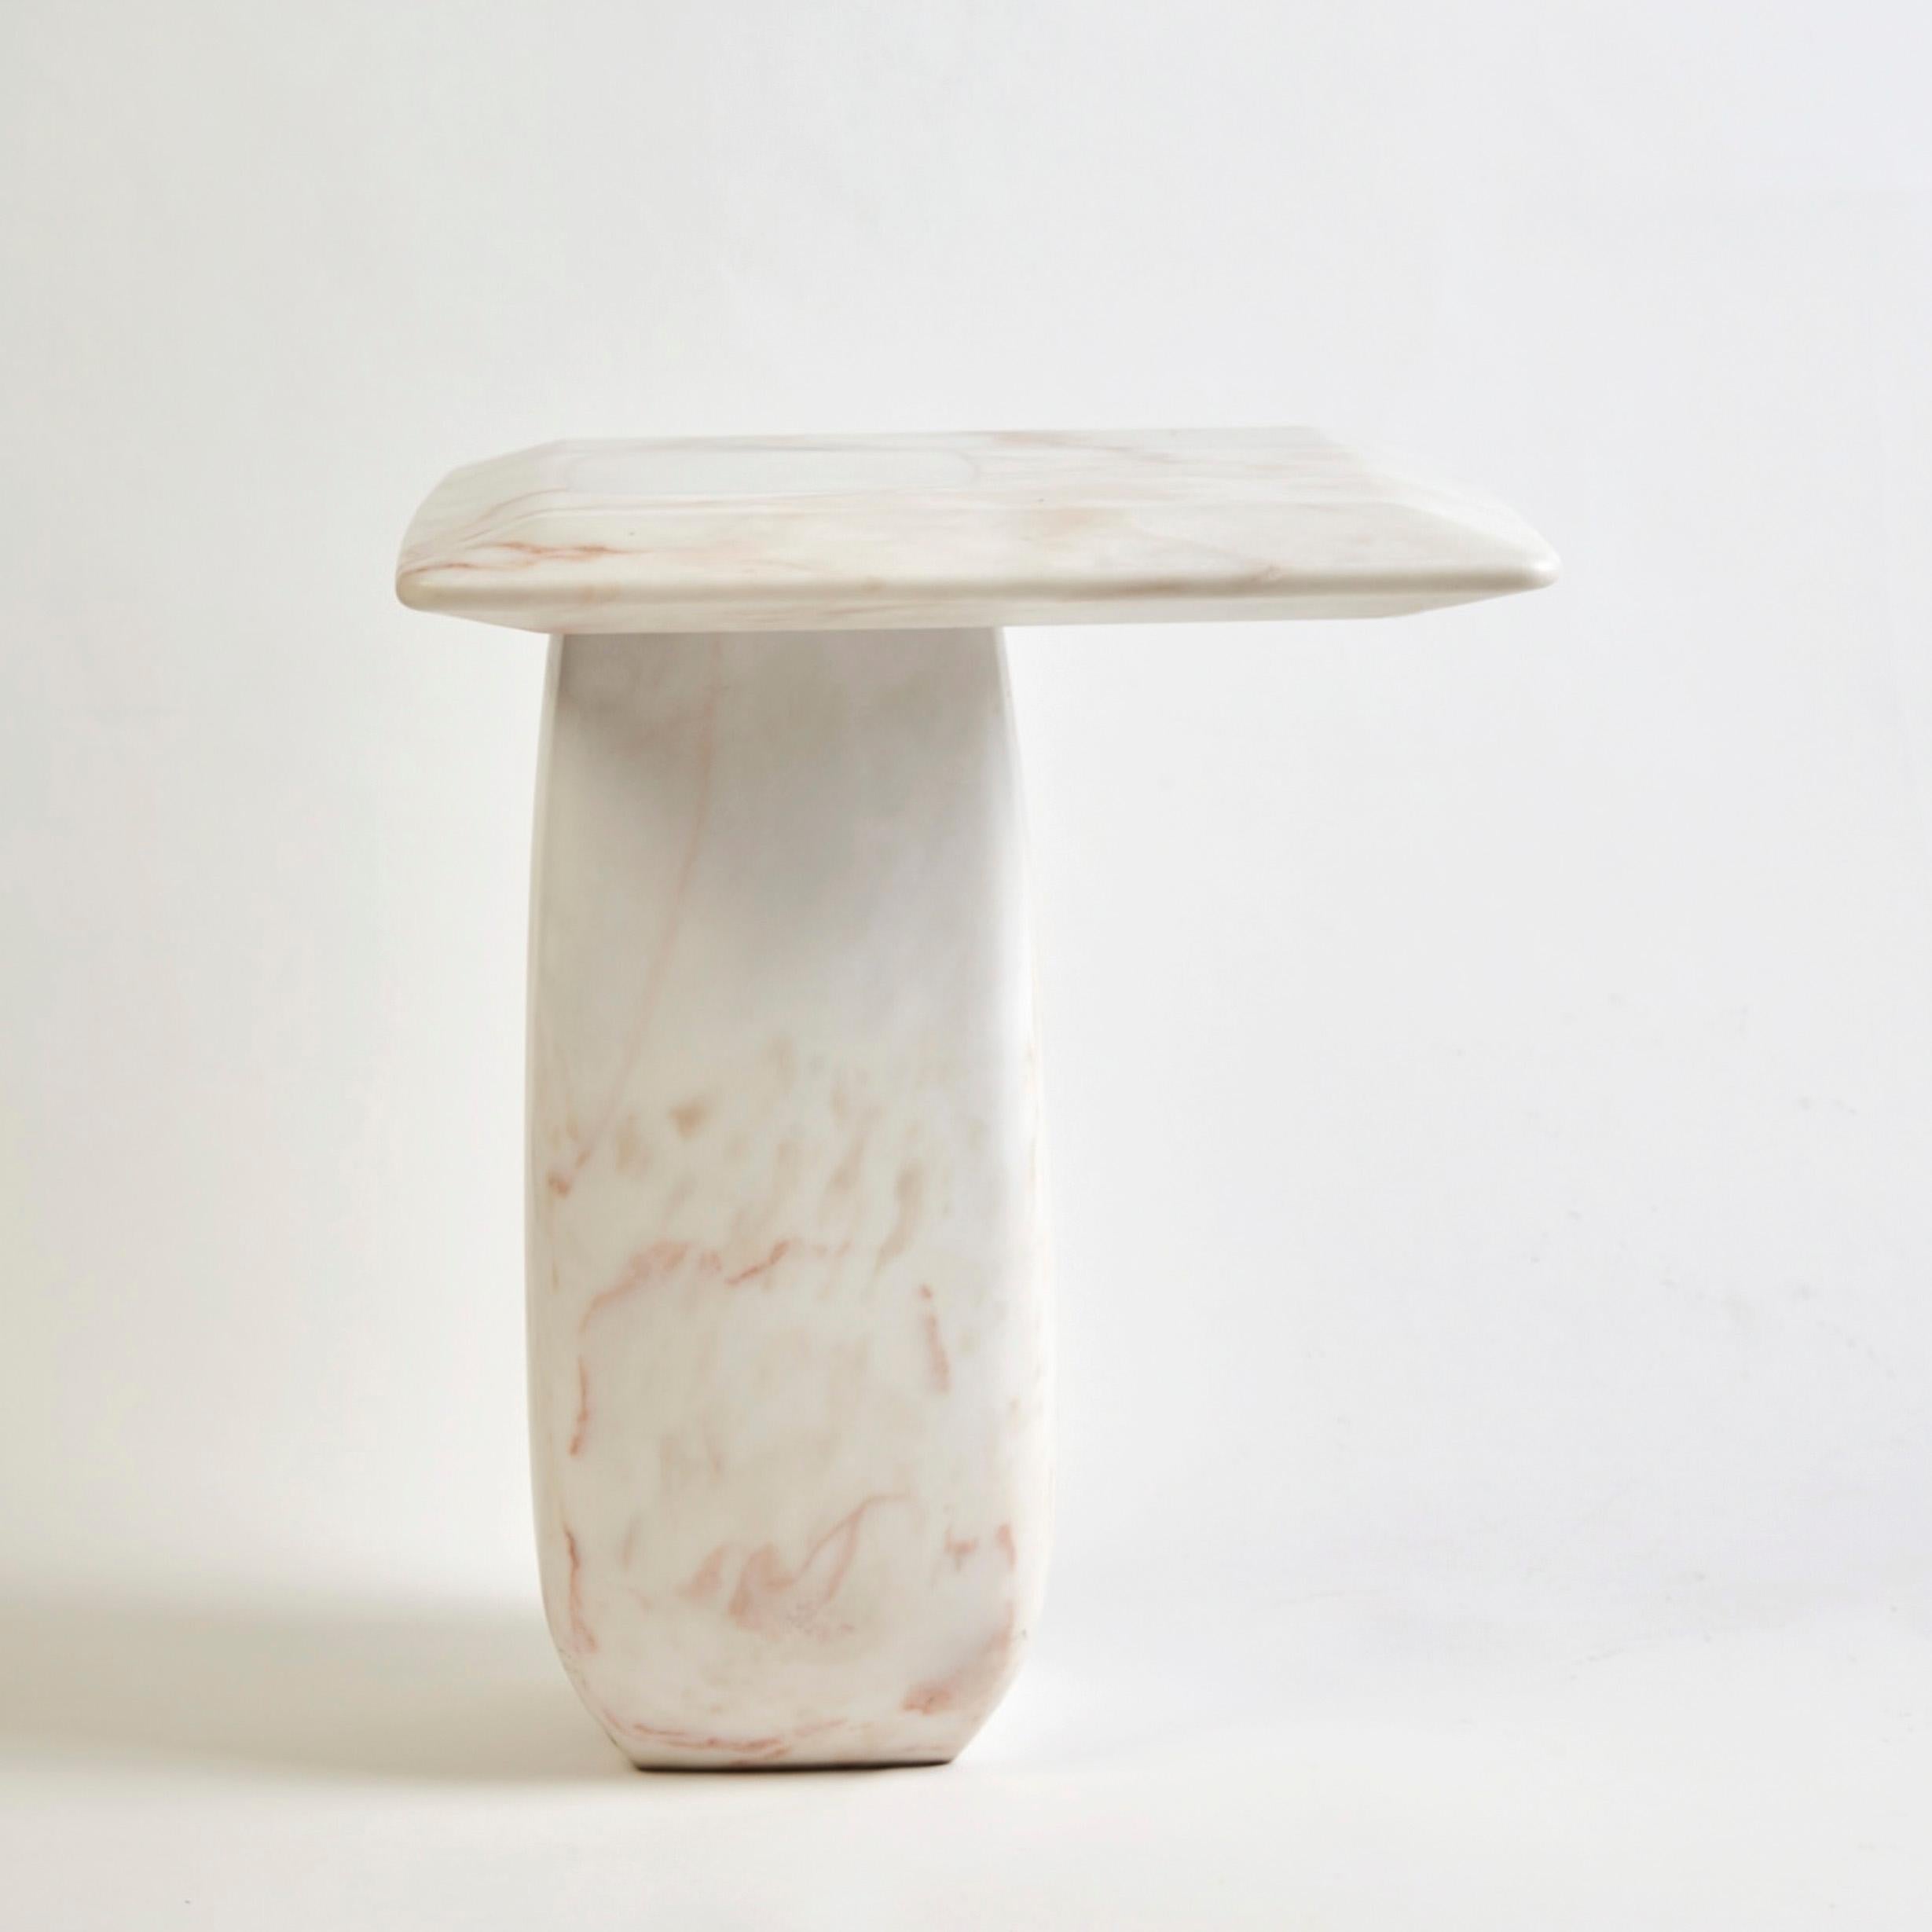 Bossa Side Table, Estremoz Marble, Handcrafted in Portugal by Duistt

The “bossa” collection is inspired by the subtlety, particular charm and harmonious simplicity of the brazilian music movement that emerged in the late 50’s, “bossa nova”. With